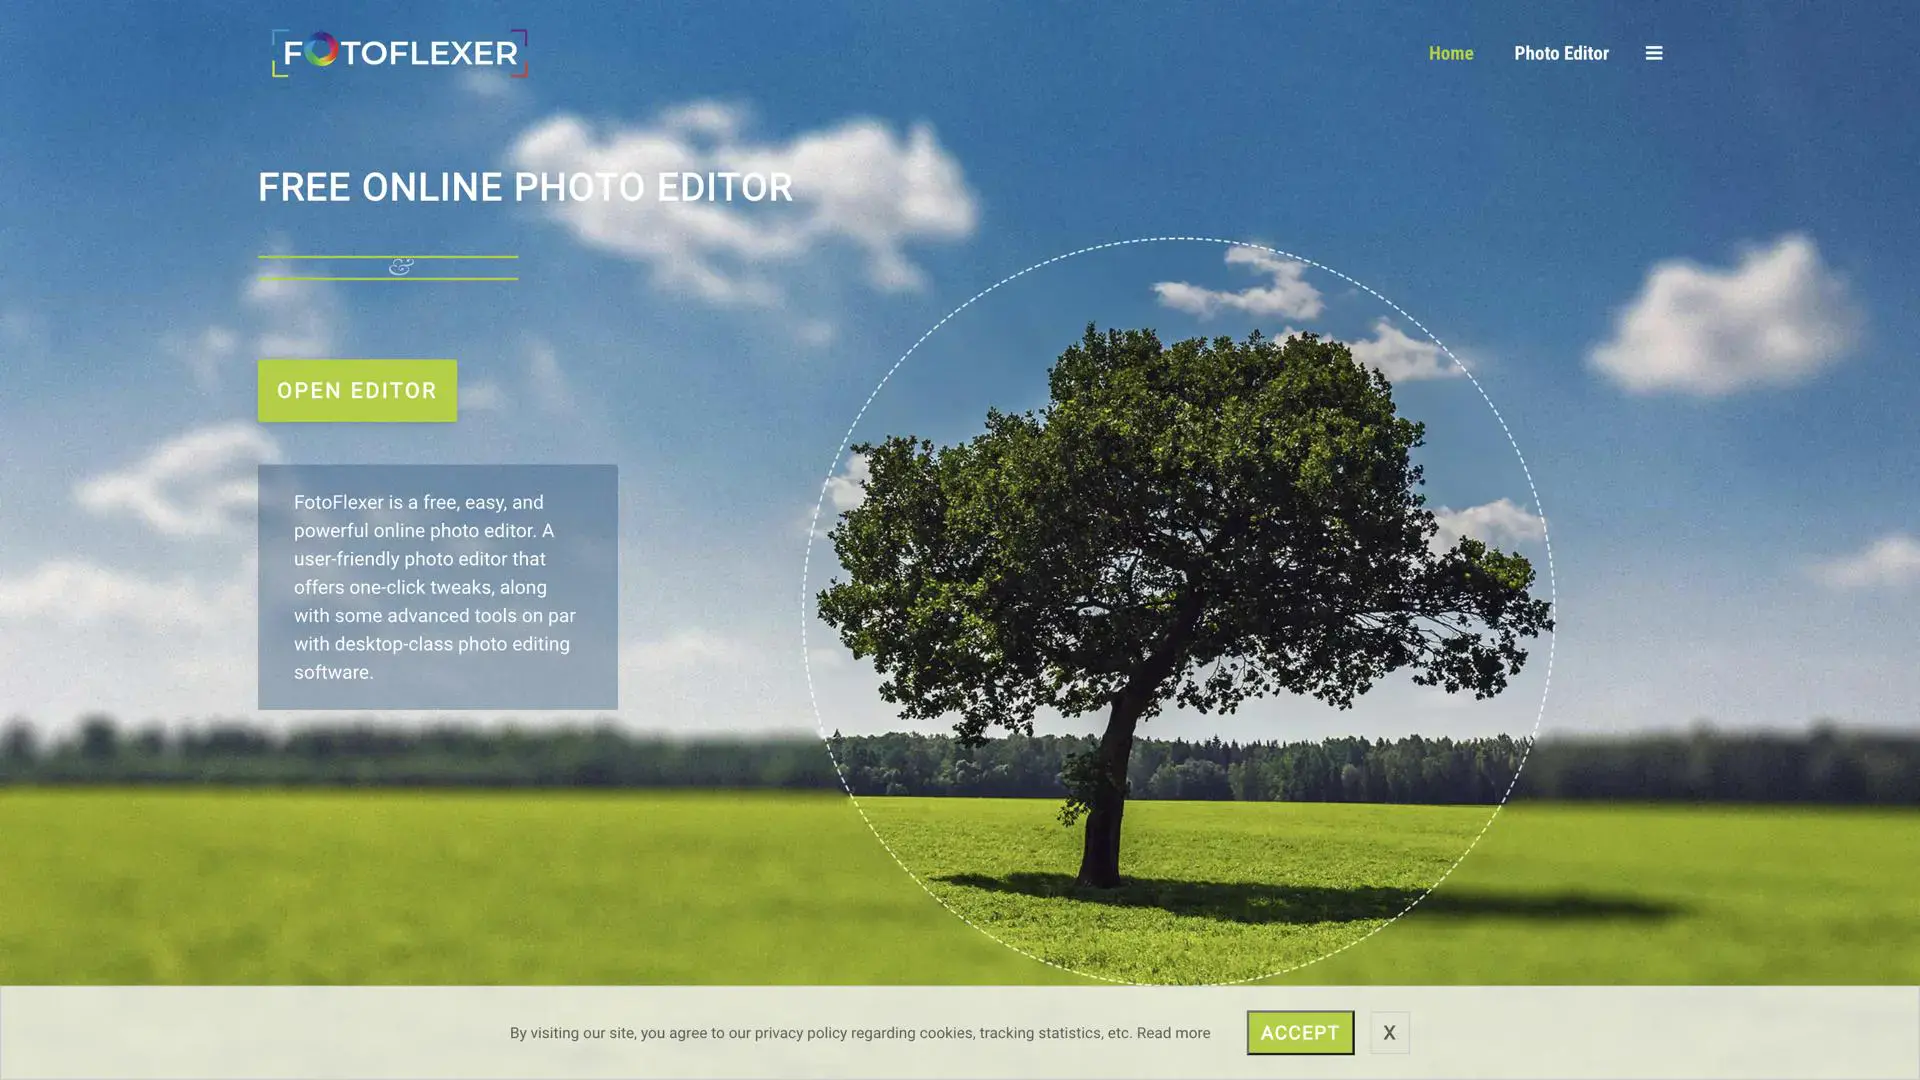 Home page of FotoFlexer